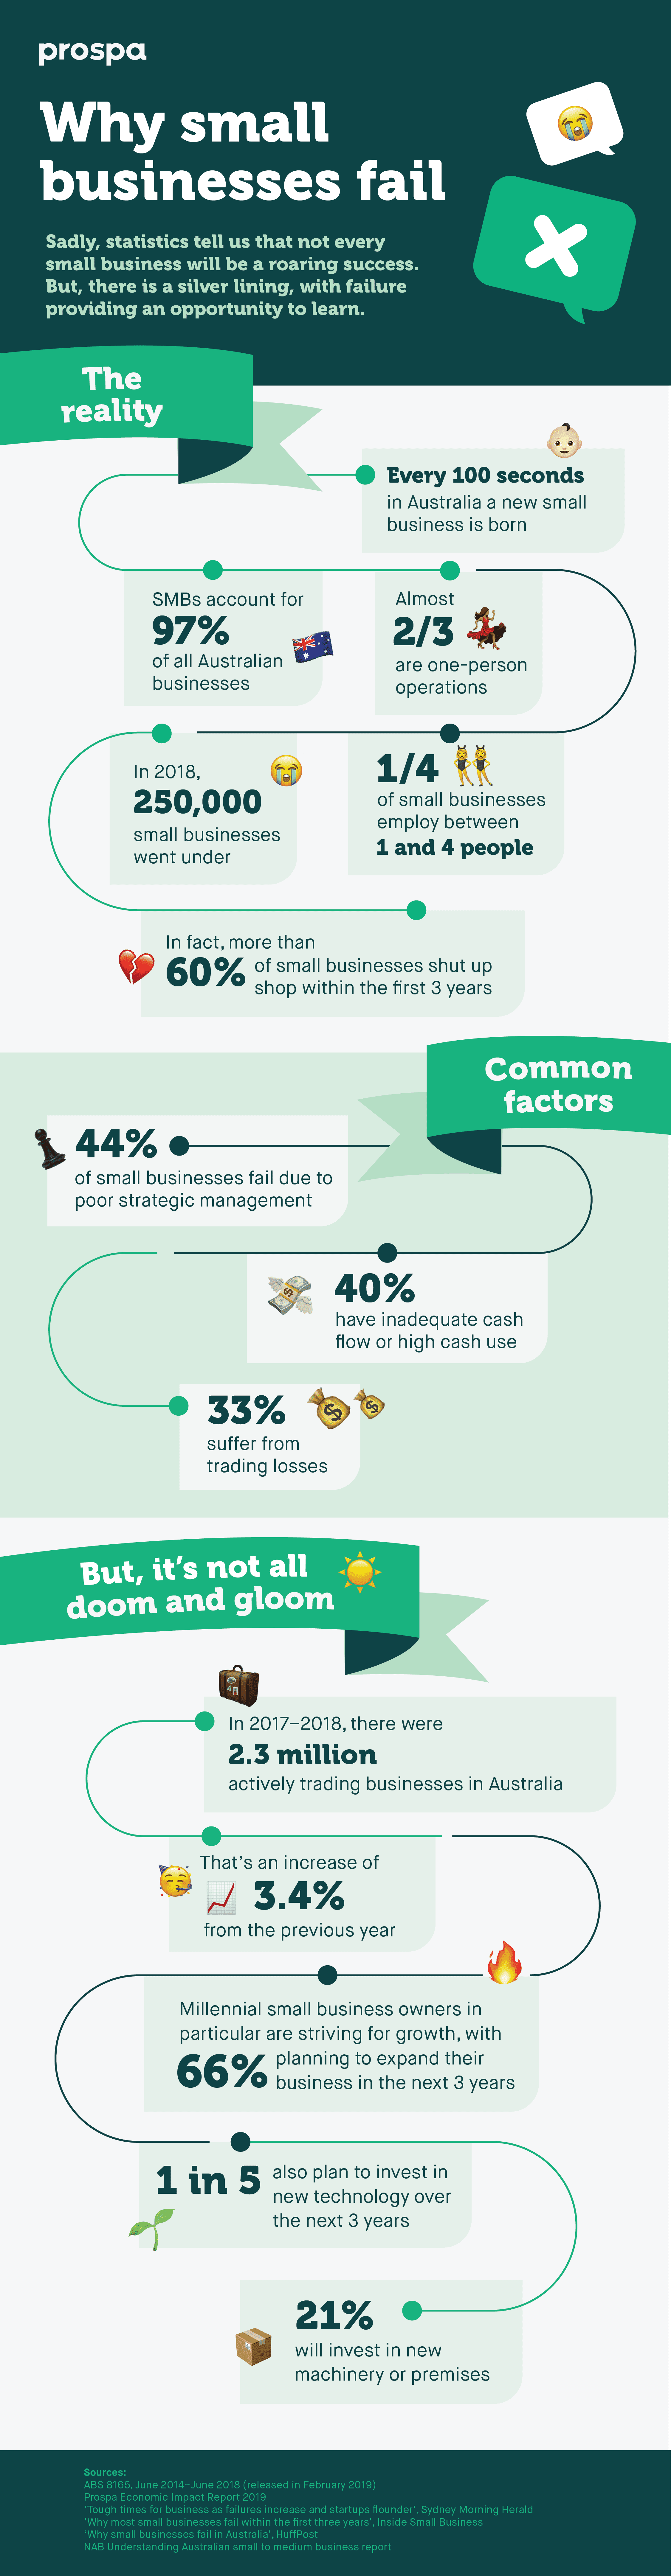 Why small businesses fail infographic